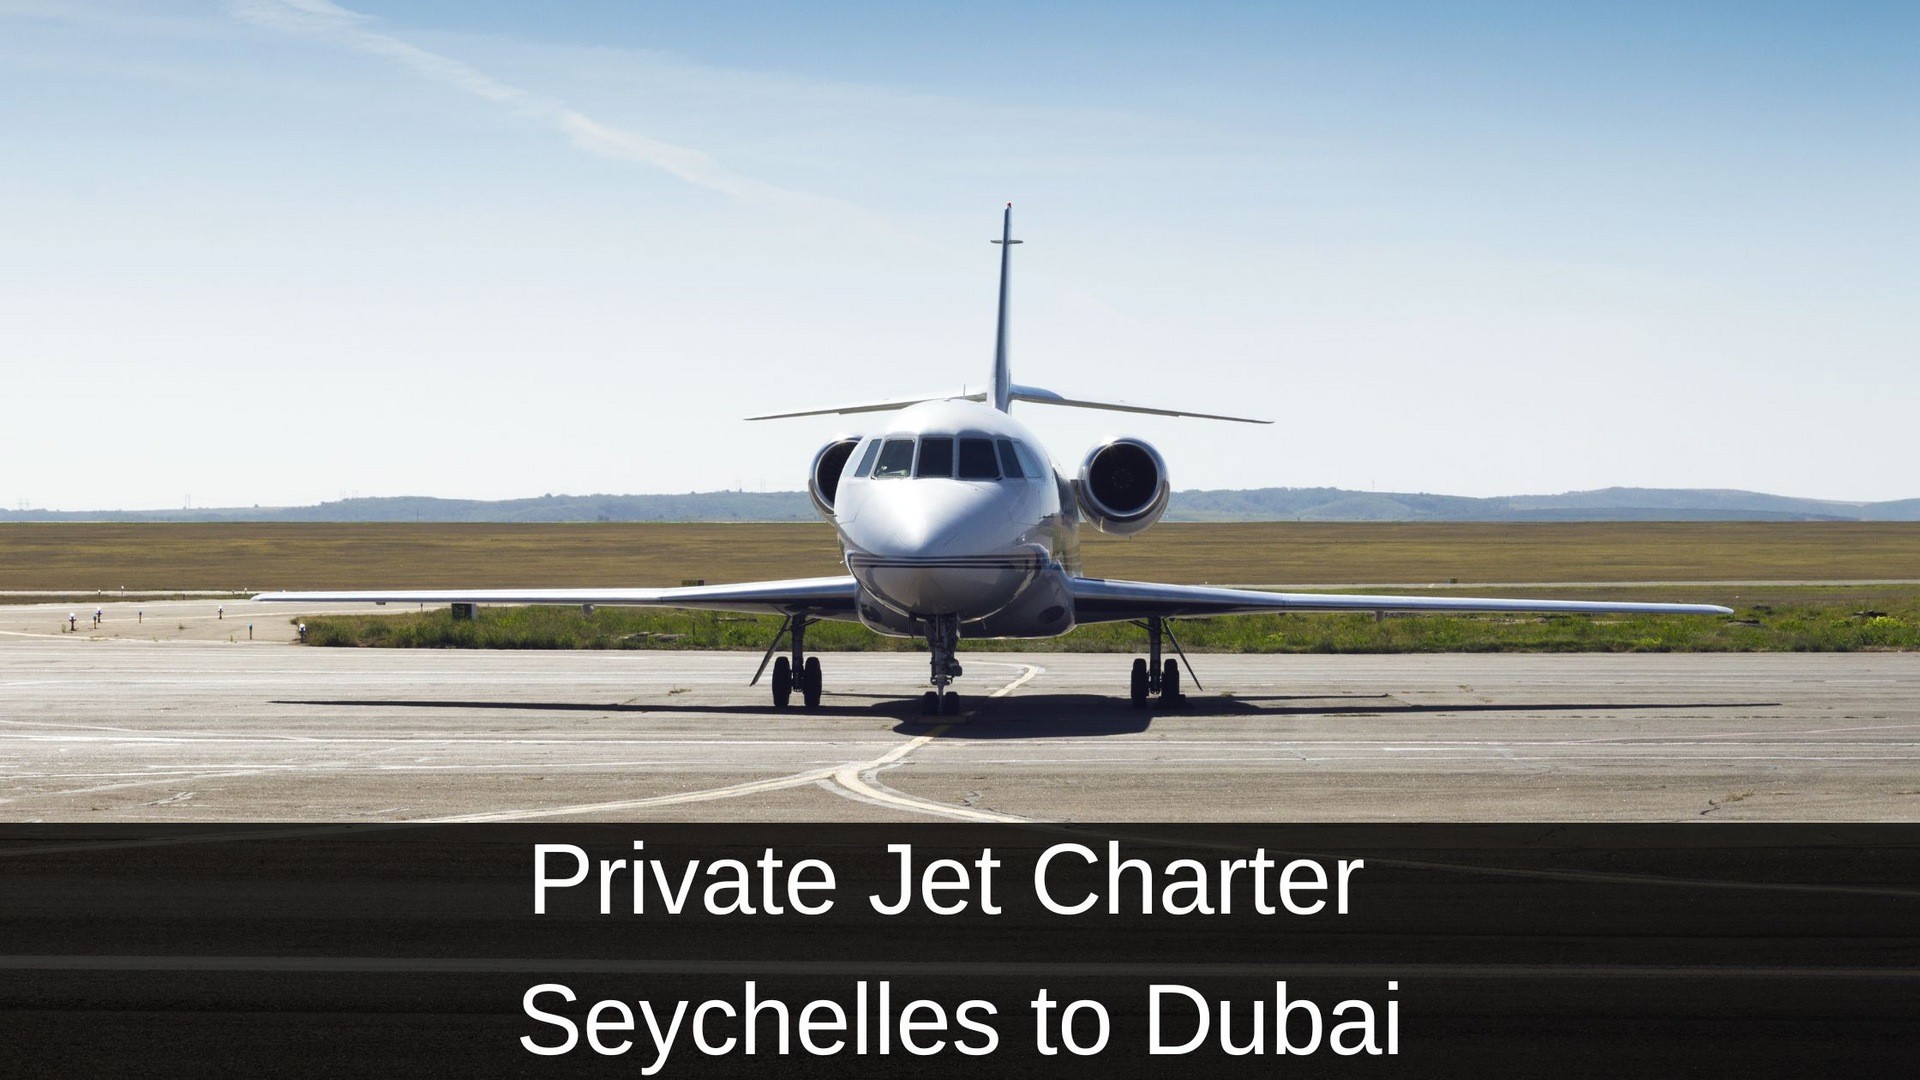 Private Jet Charter from Seychelles to Dubai